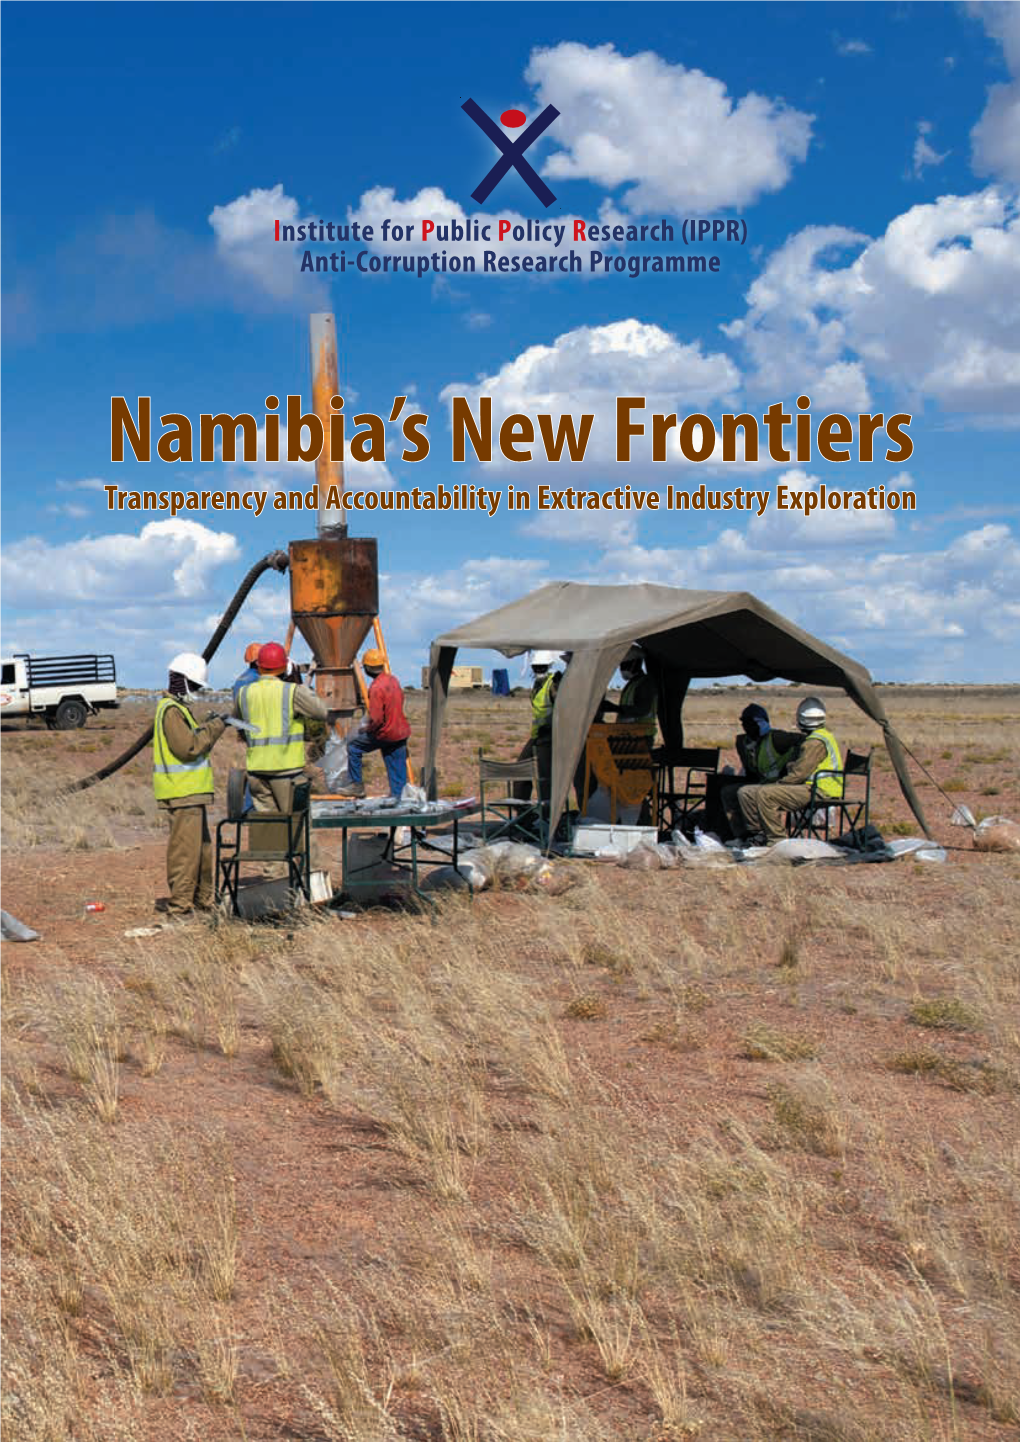 Namibia's New Frontiers